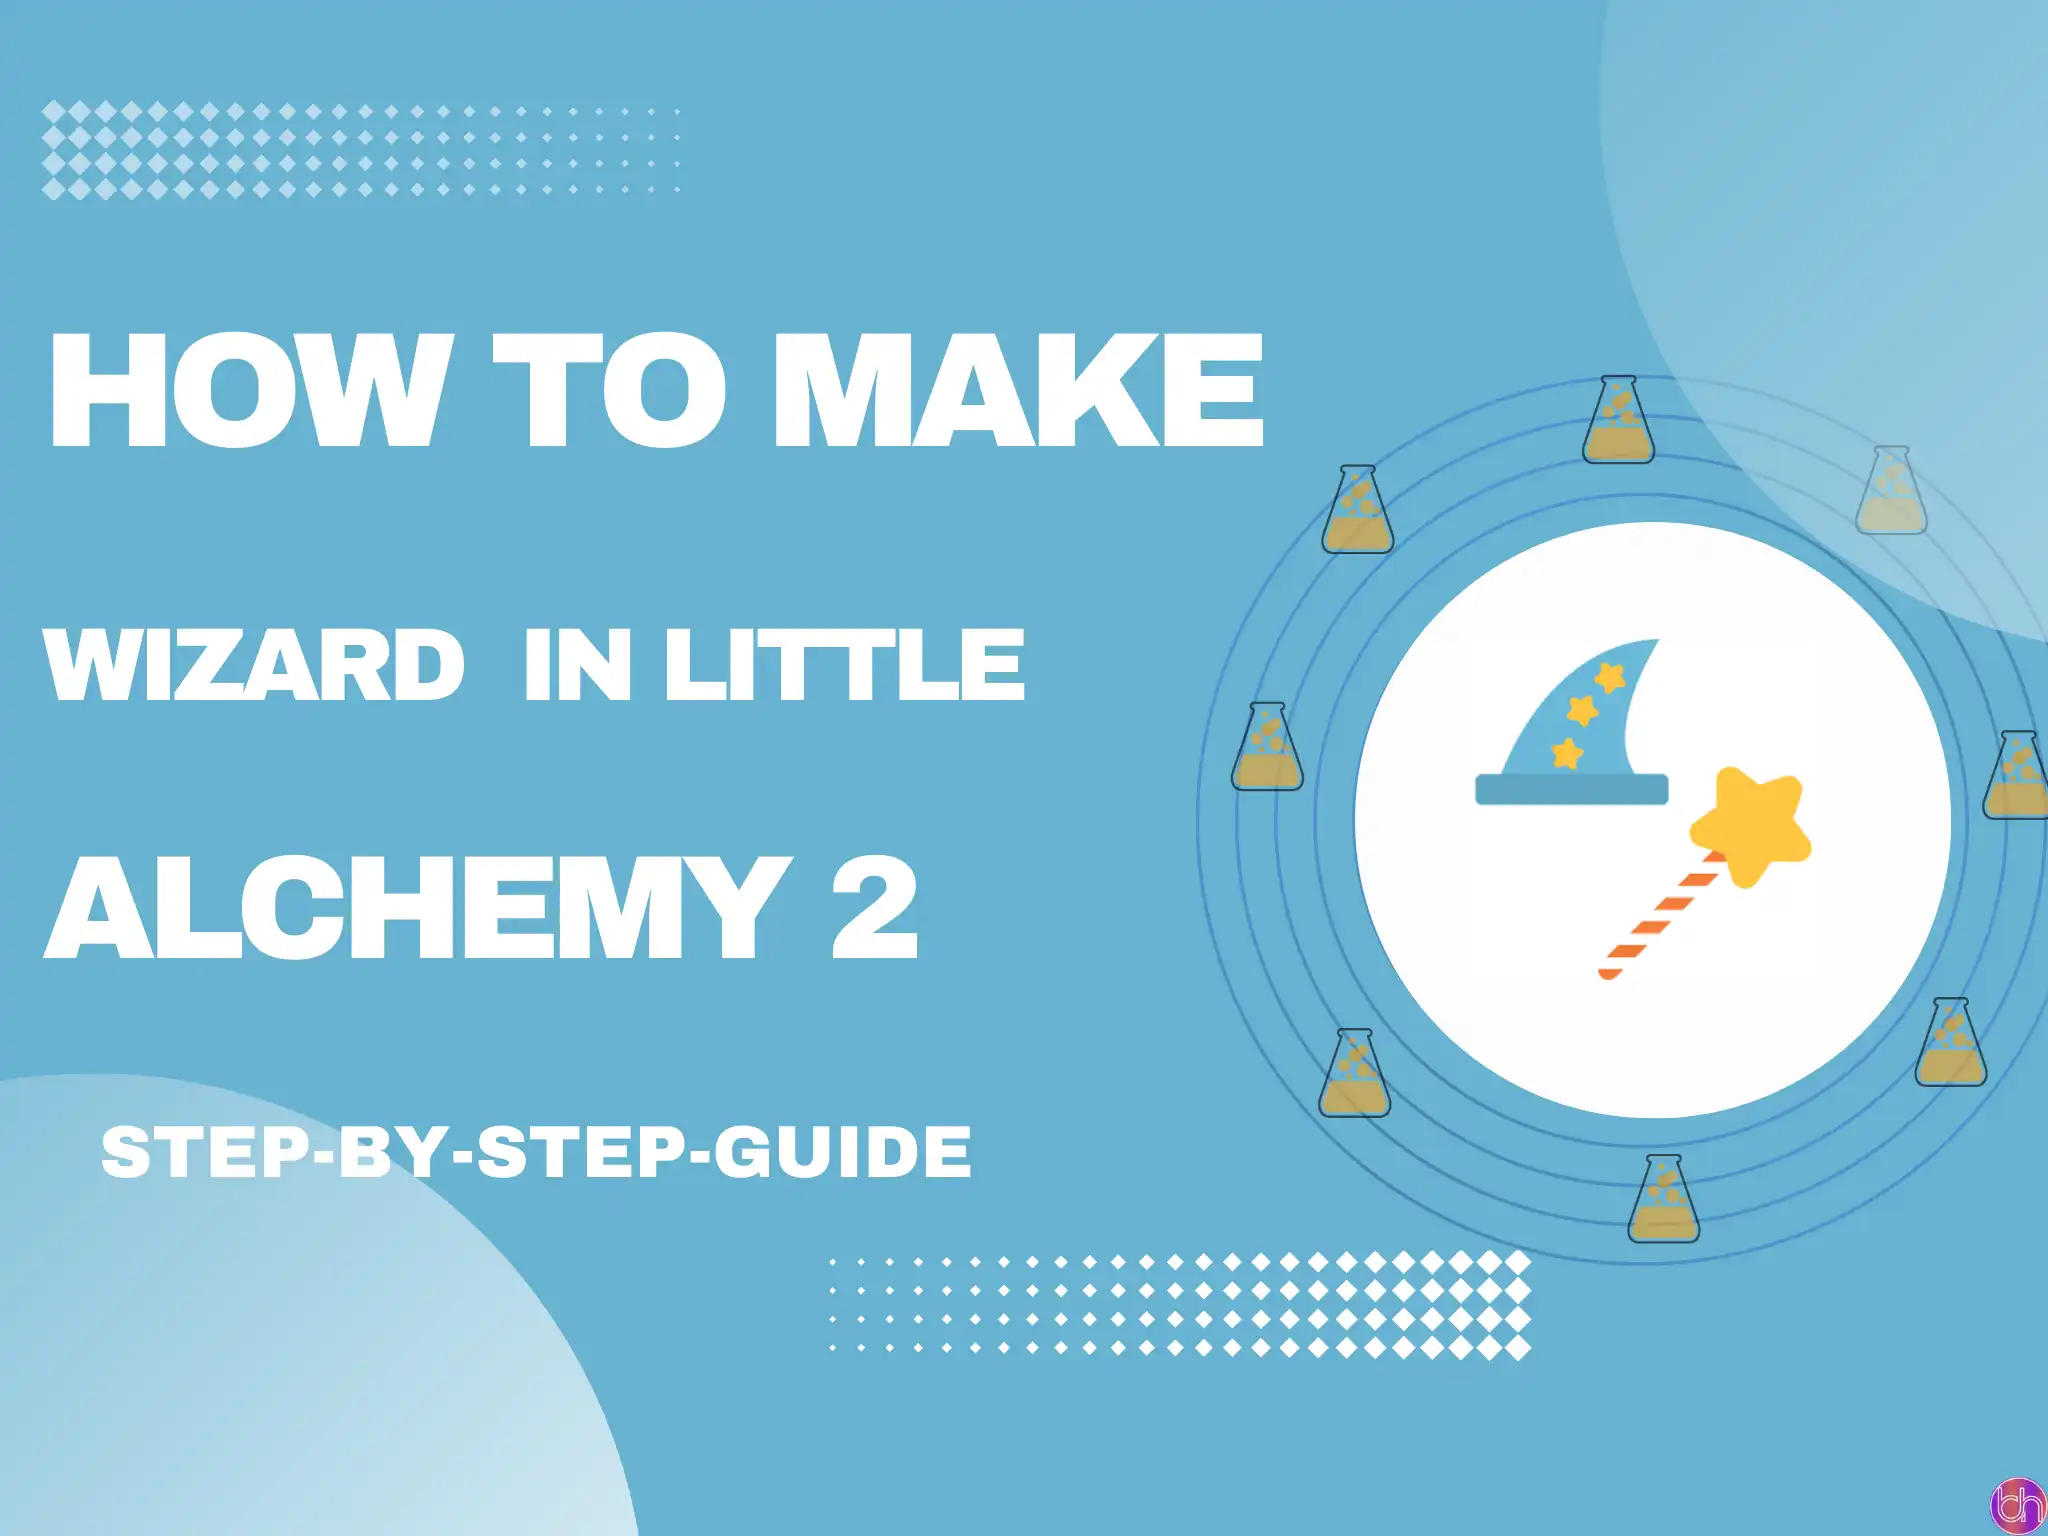 How to make Wizard in Little Alchemy 2